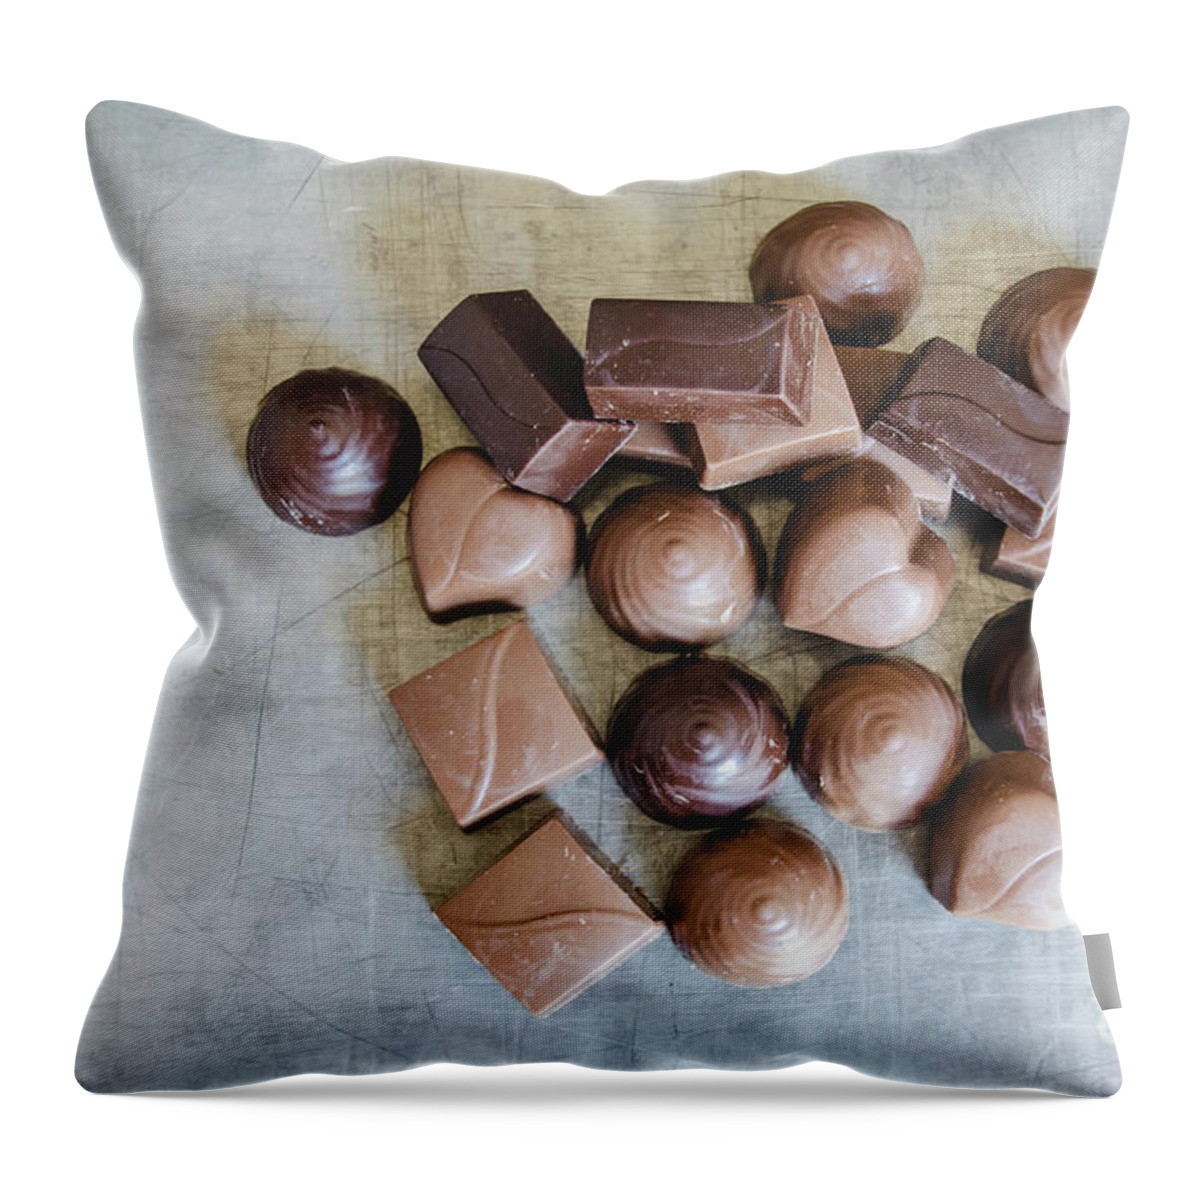 Variety Throw Pillow featuring the photograph Chocolate 7 by Andrea Anderegg